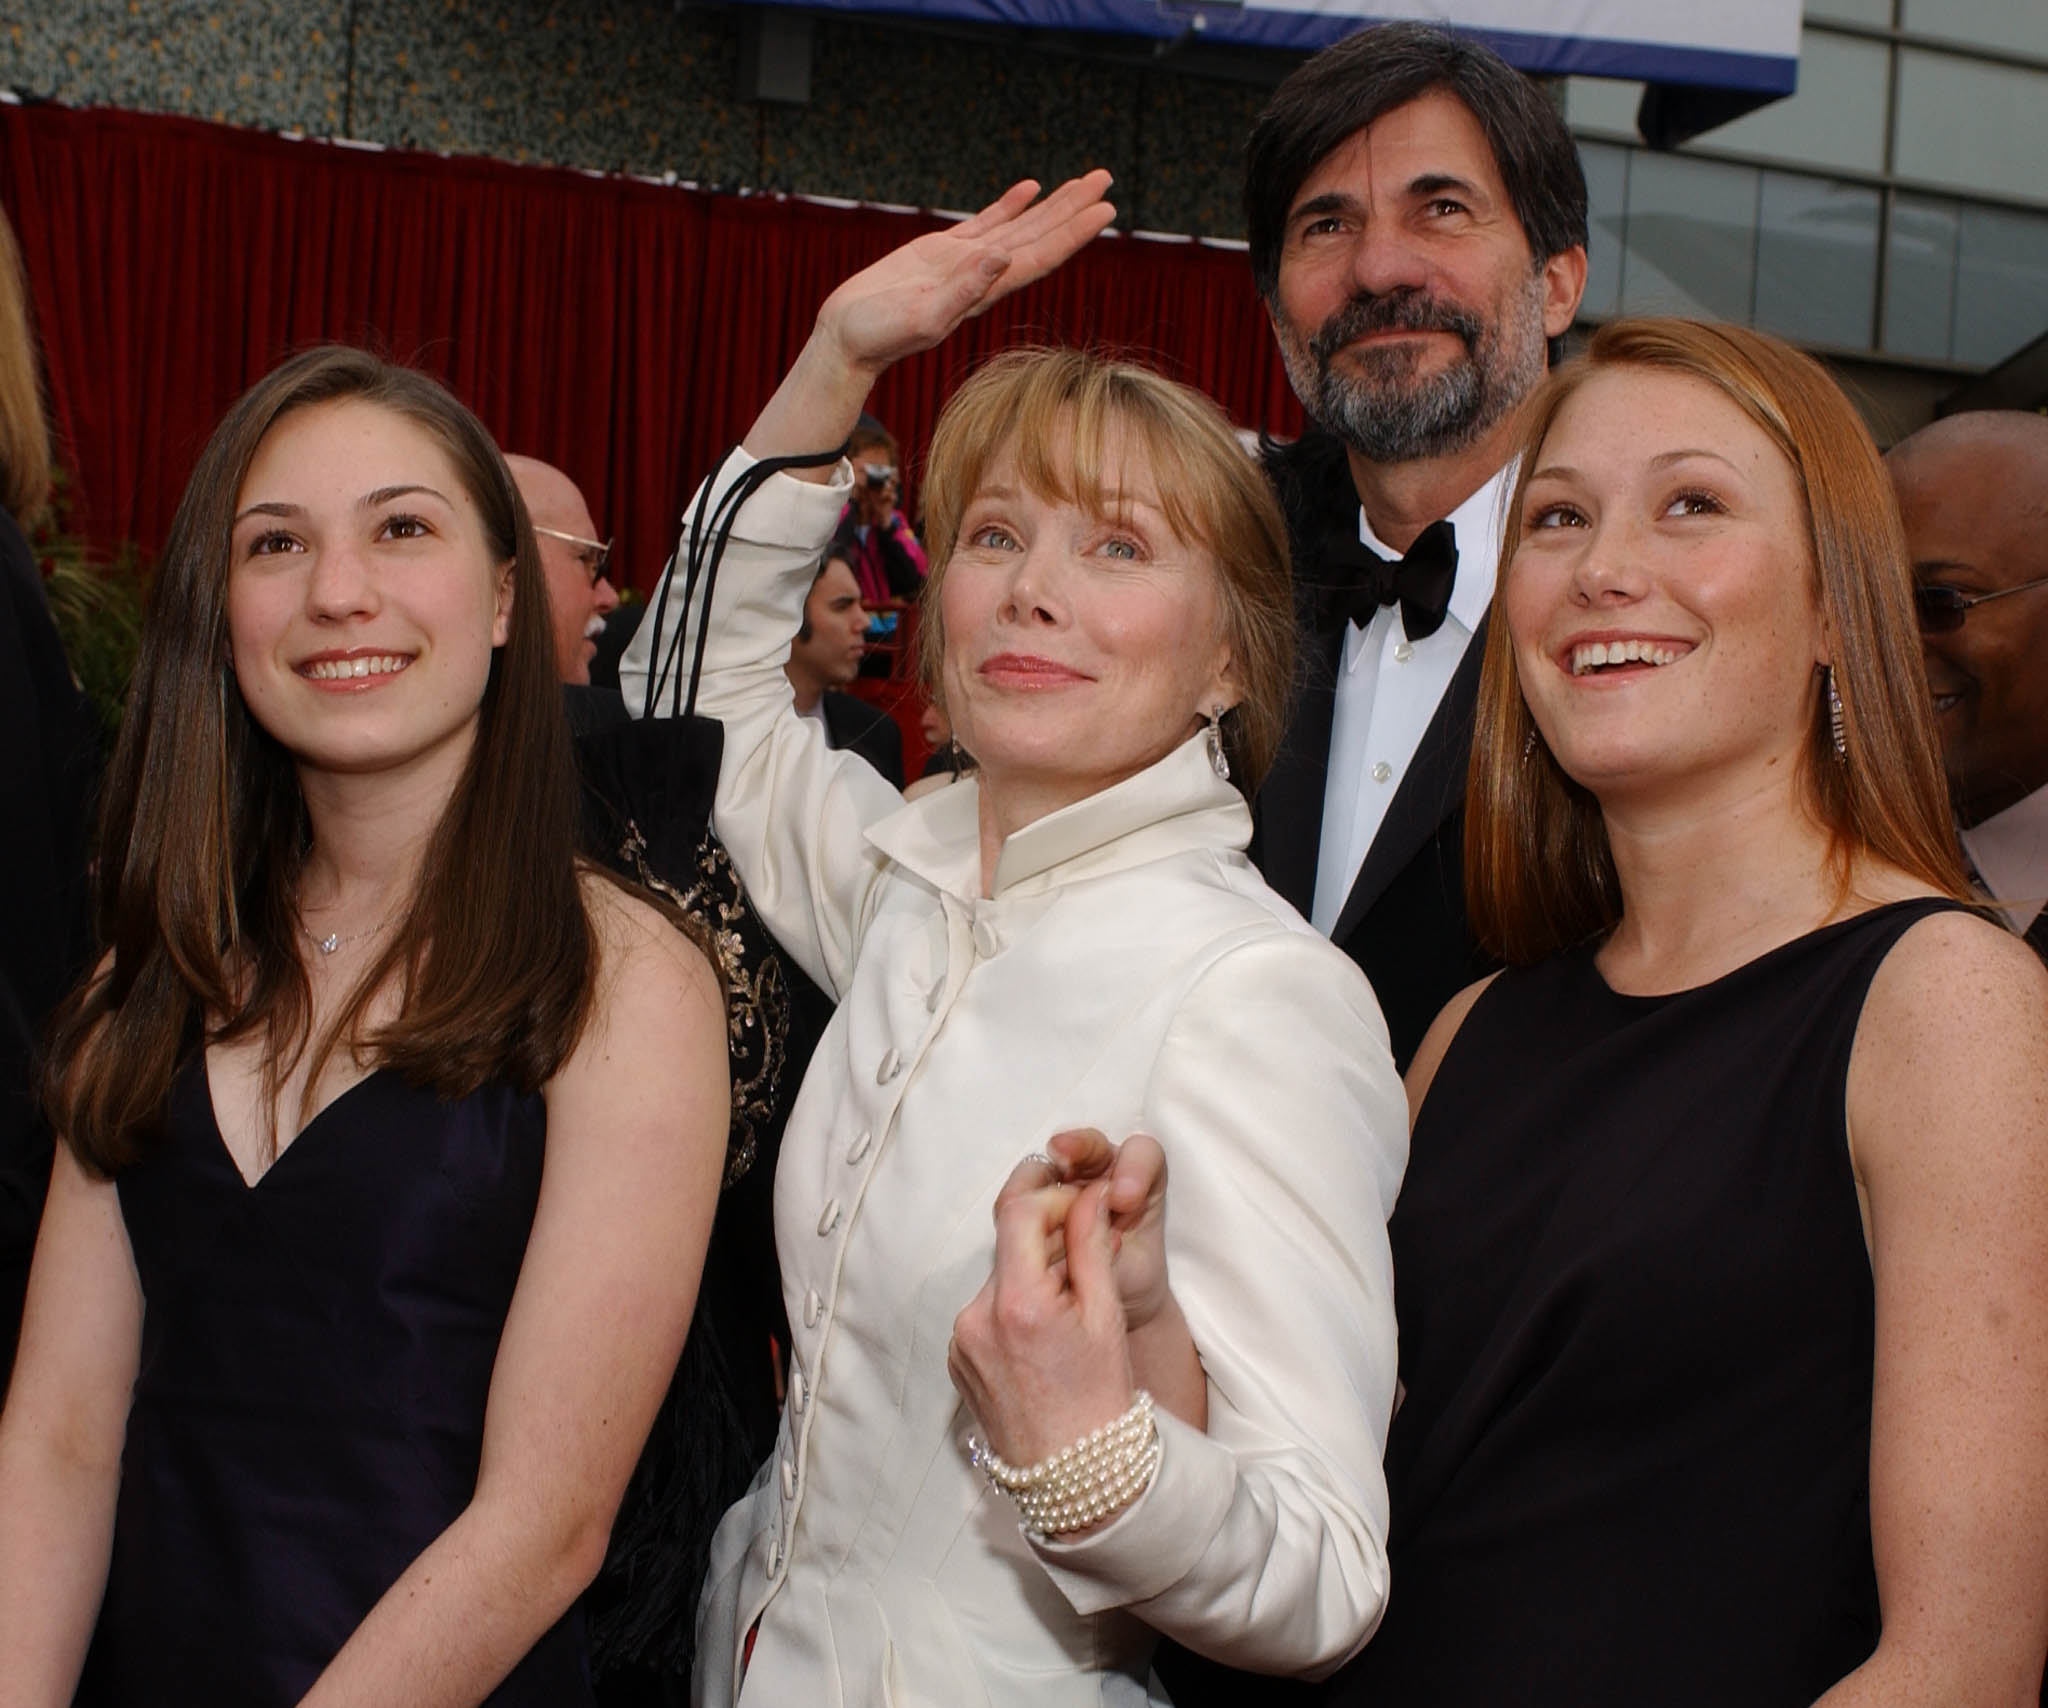 Sissy Spacek and Jack Fisk arrive with their daughters Schuyler and Madison at the 74th Annual Academy Awards at the Kodak Theatre on March 24, 2002 in Hollywood, California | Source: Getty Images